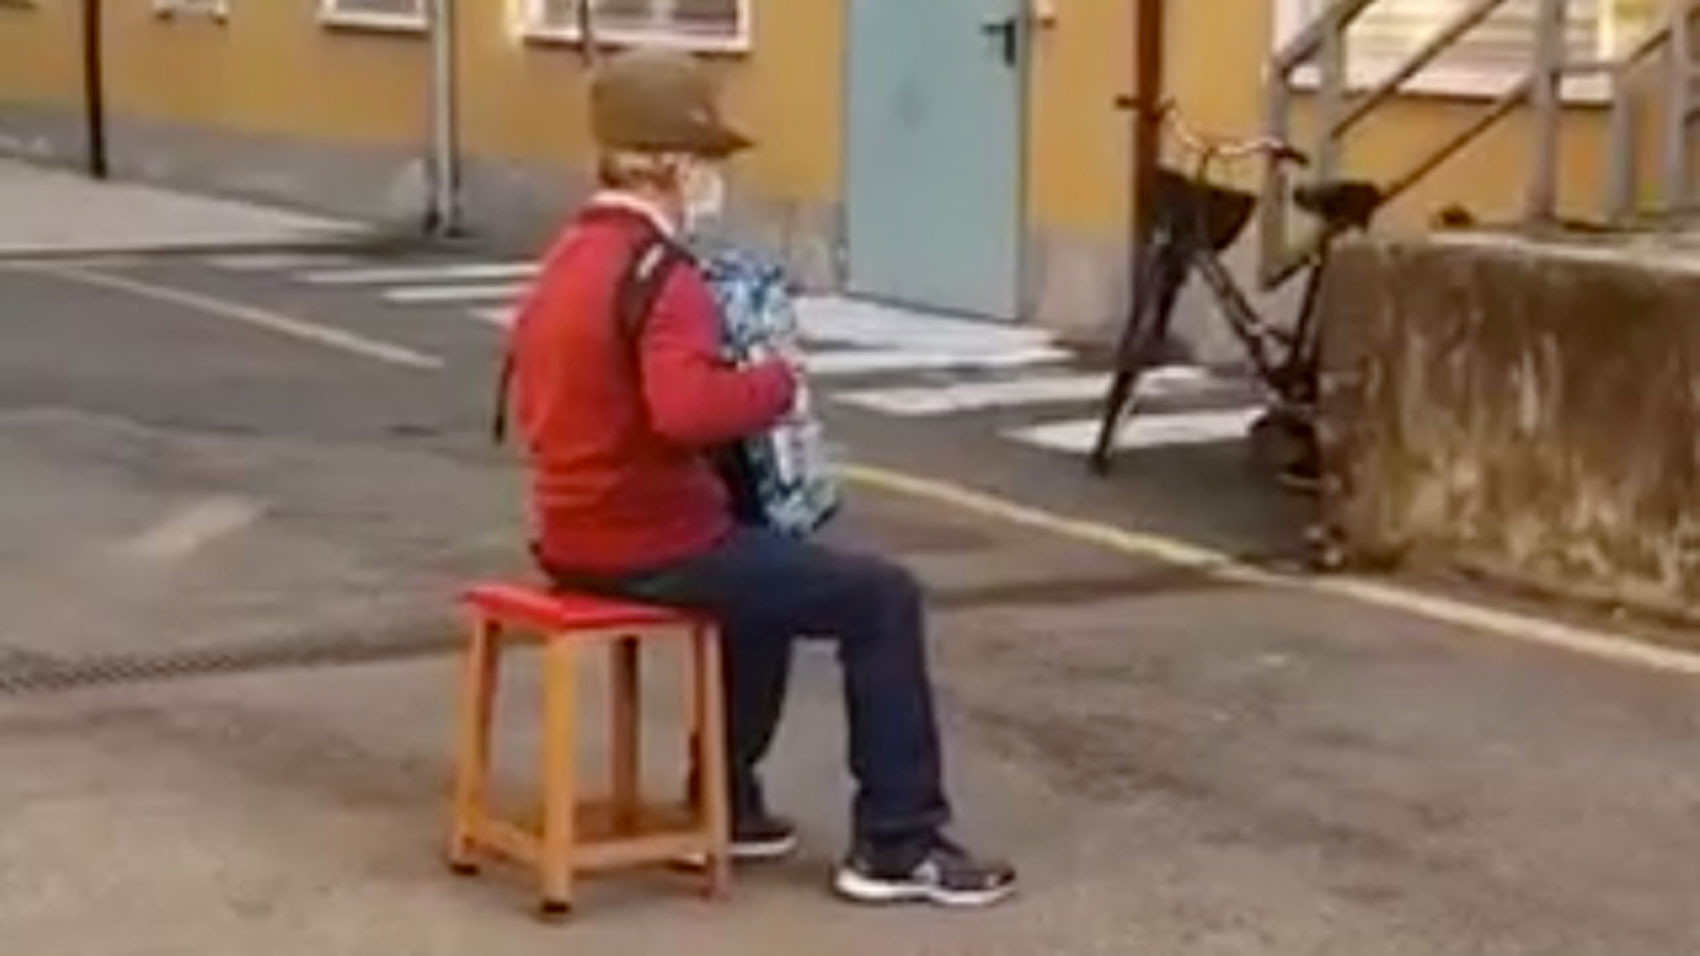 Stefano Bozzini, 81, serenades Carla Sacchi, his wife of 47 years, from beneath her hospital window in Emilia-Romagna, Italy. Covid-19 restrictions prevented him from visiting her.